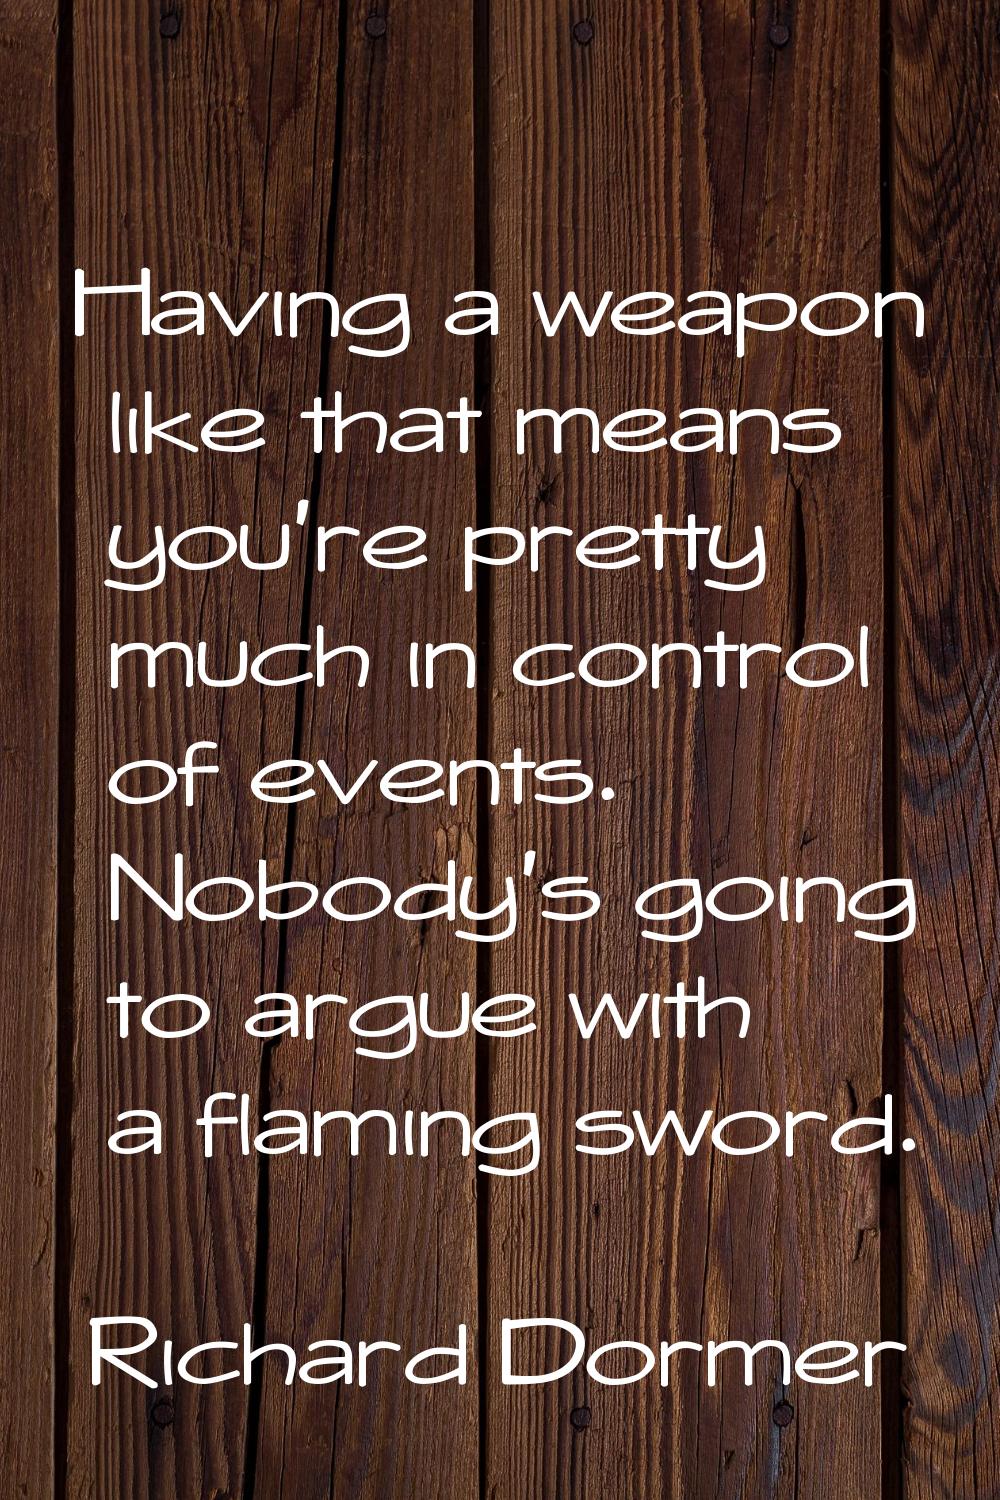 Having a weapon like that means you're pretty much in control of events. Nobody's going to argue wi